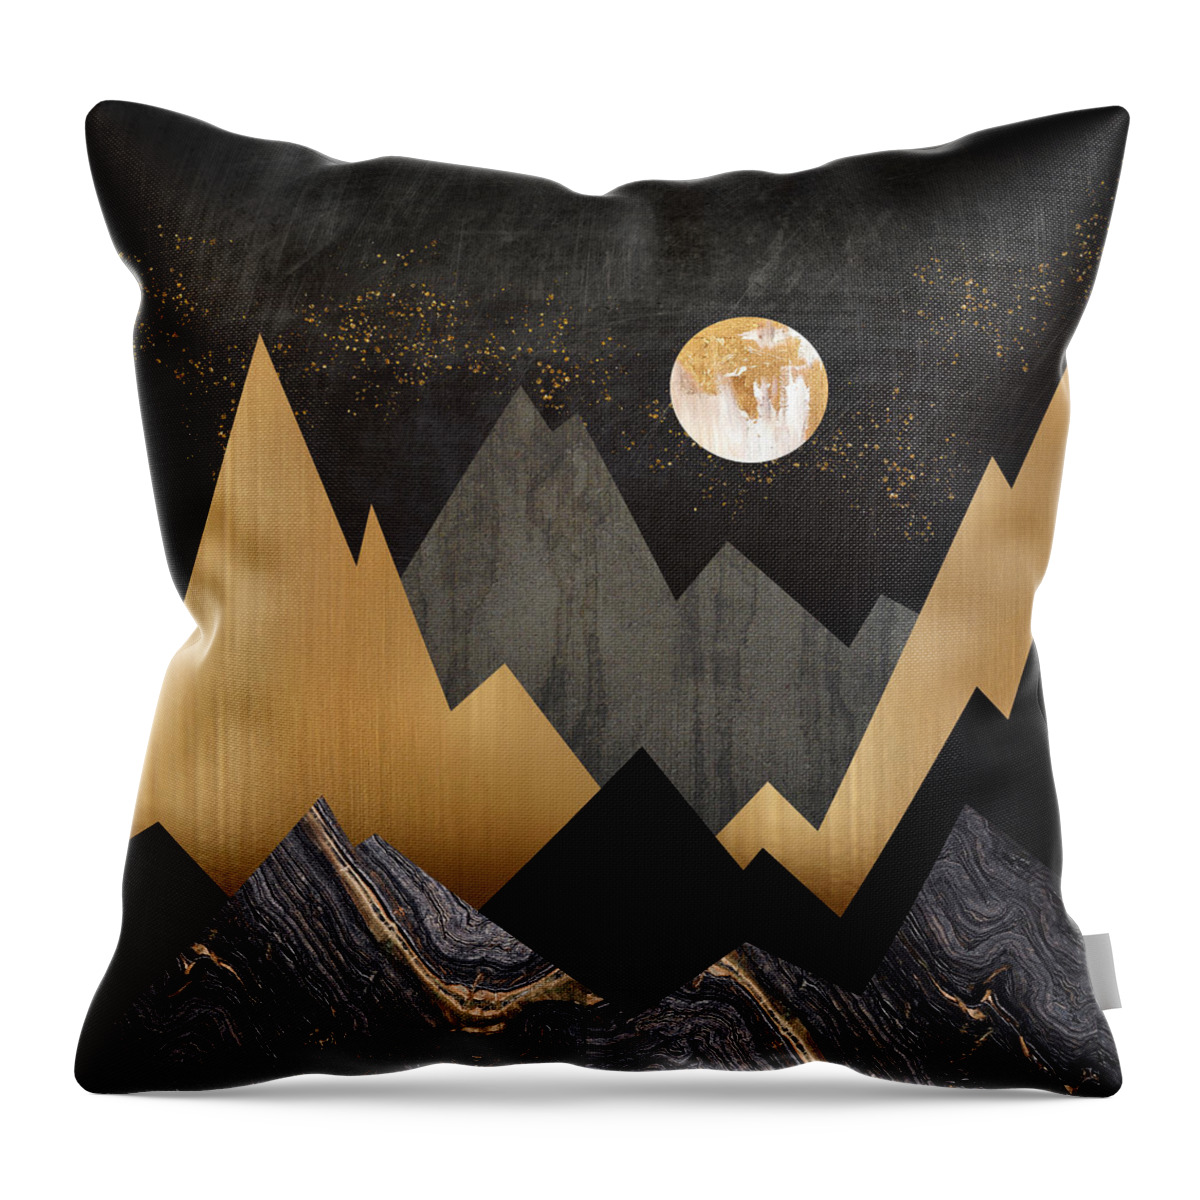 Digital Throw Pillow featuring the digital art Metallic Night by Spacefrog Designs